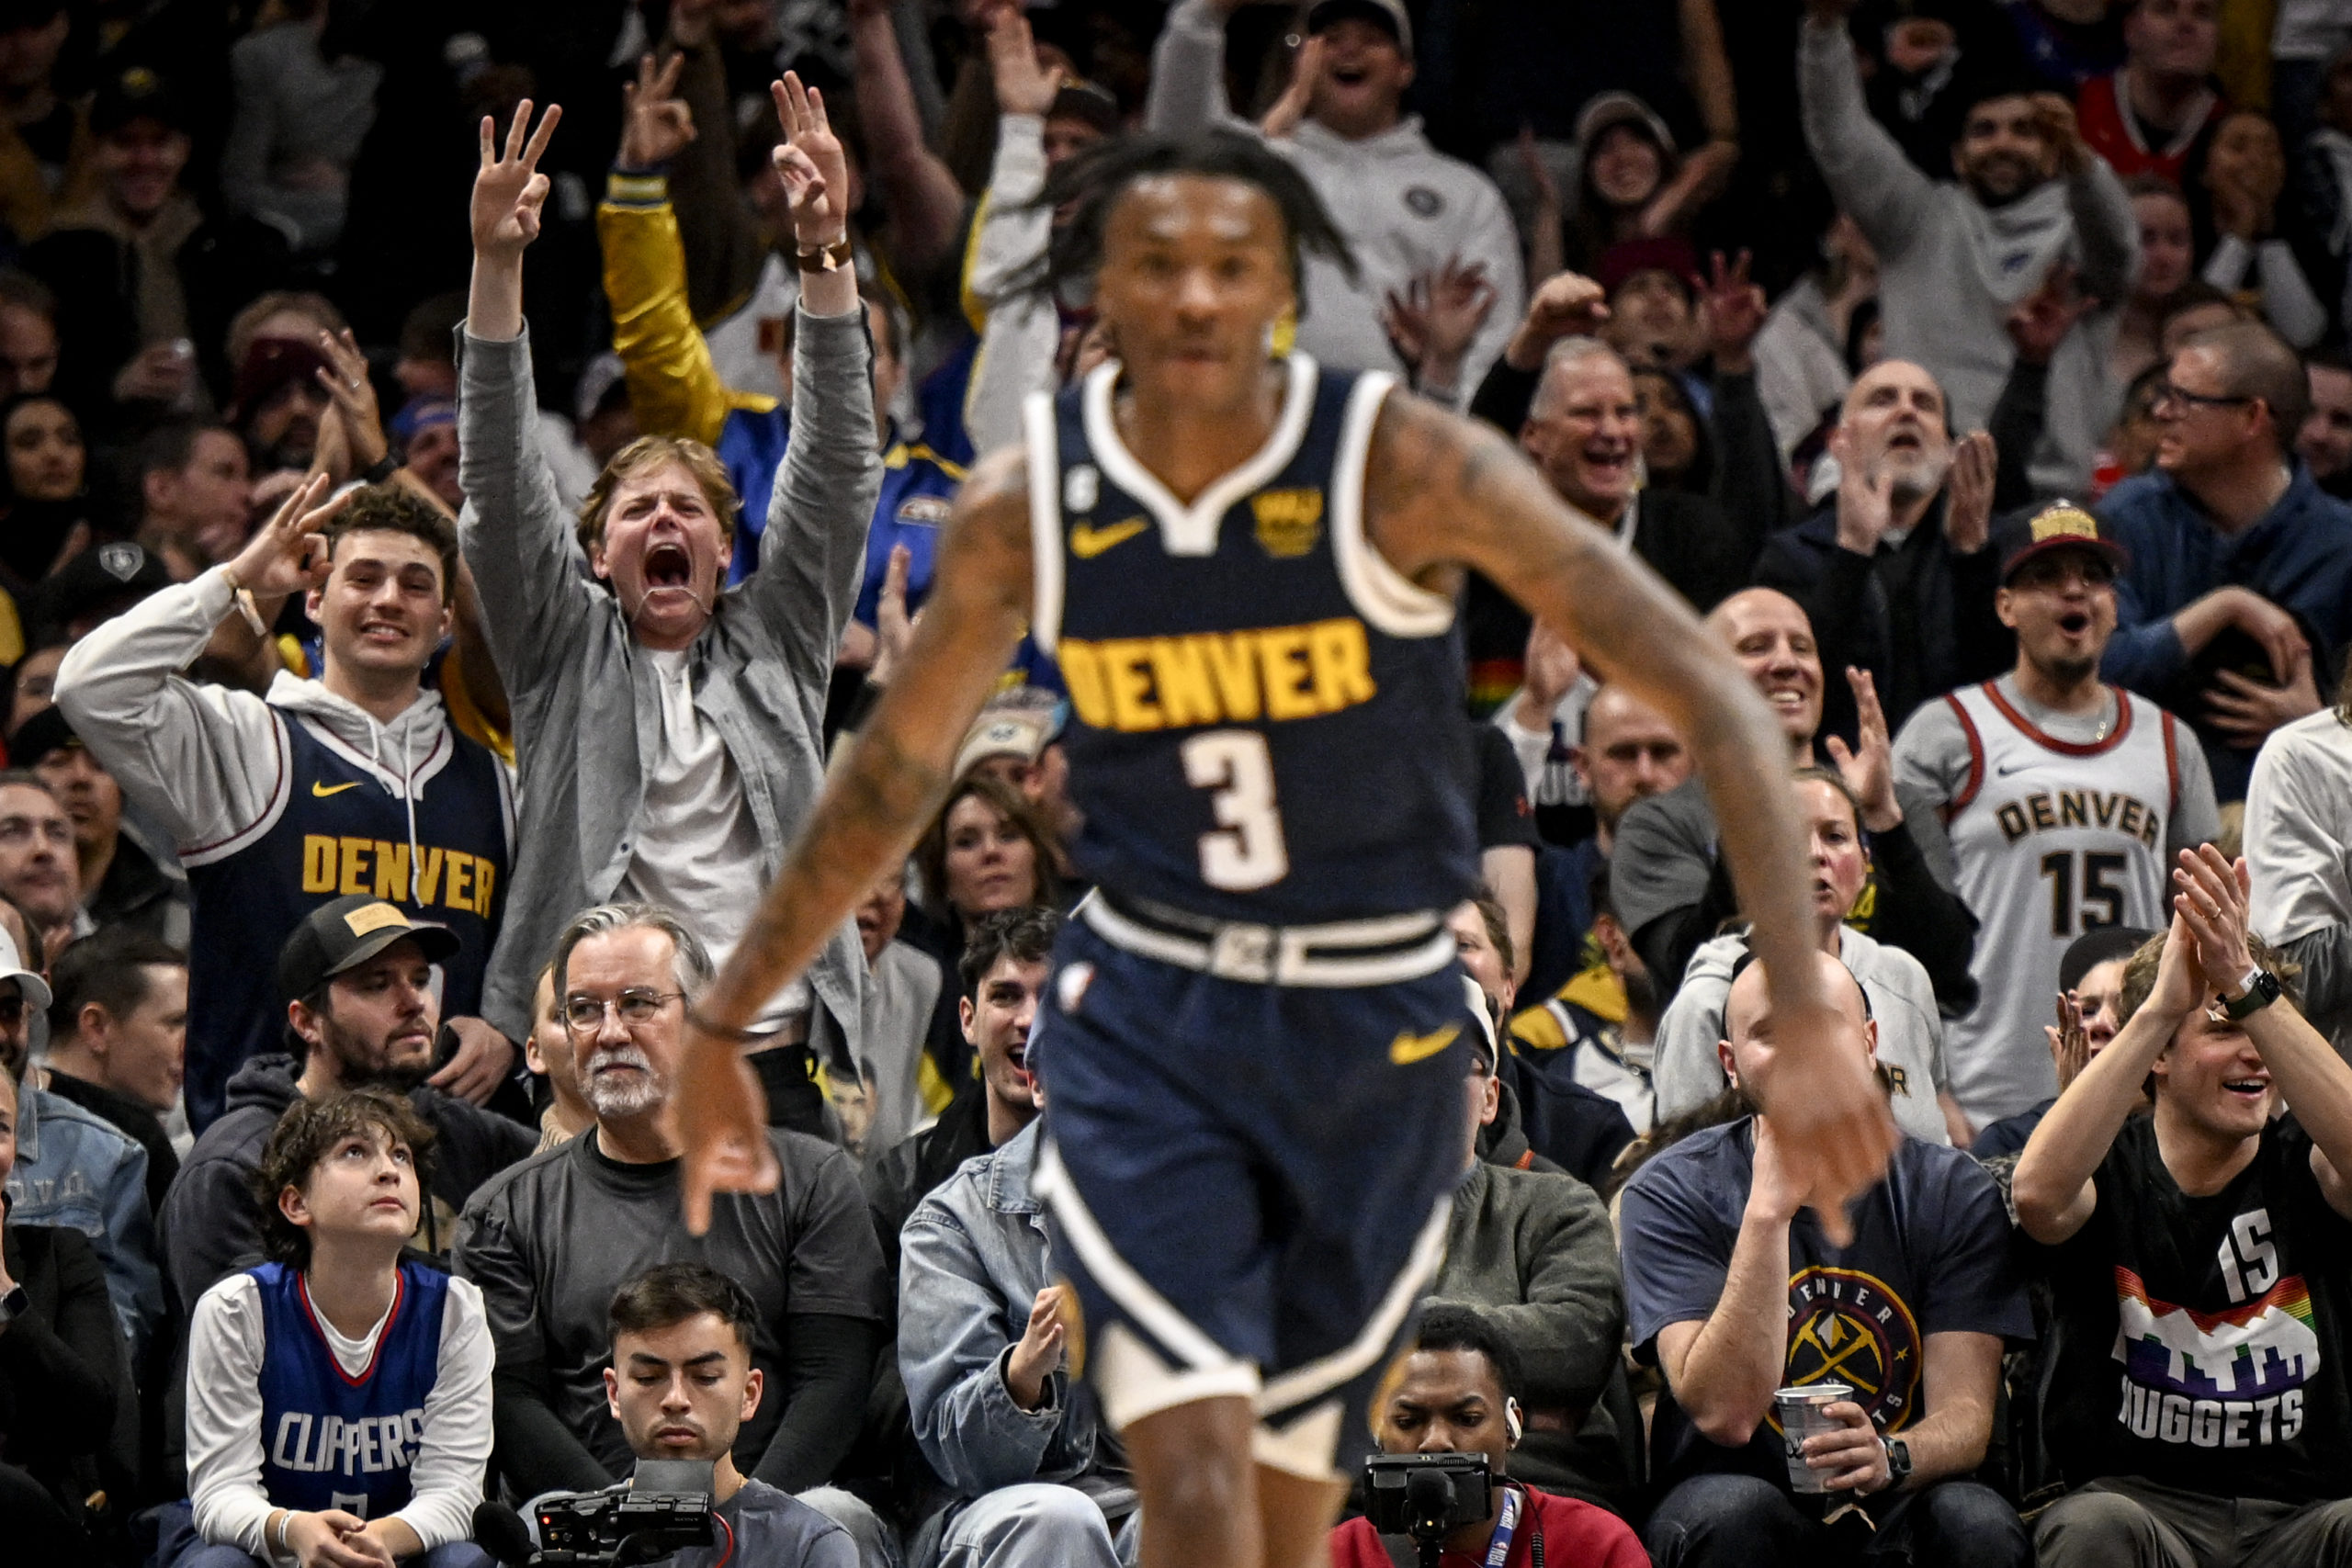 DENVER, CO - JANUARY 5: Denver Nuggets fans erupt after a three pointer by Bones Hyland (3) agains the LA Clippers during the second quarter at Ball Arena in Denver on Thursday, January 5, 2023. (Photo by AAron Ontiveroz/MediaNews Group/The Denver Post via Getty Images)